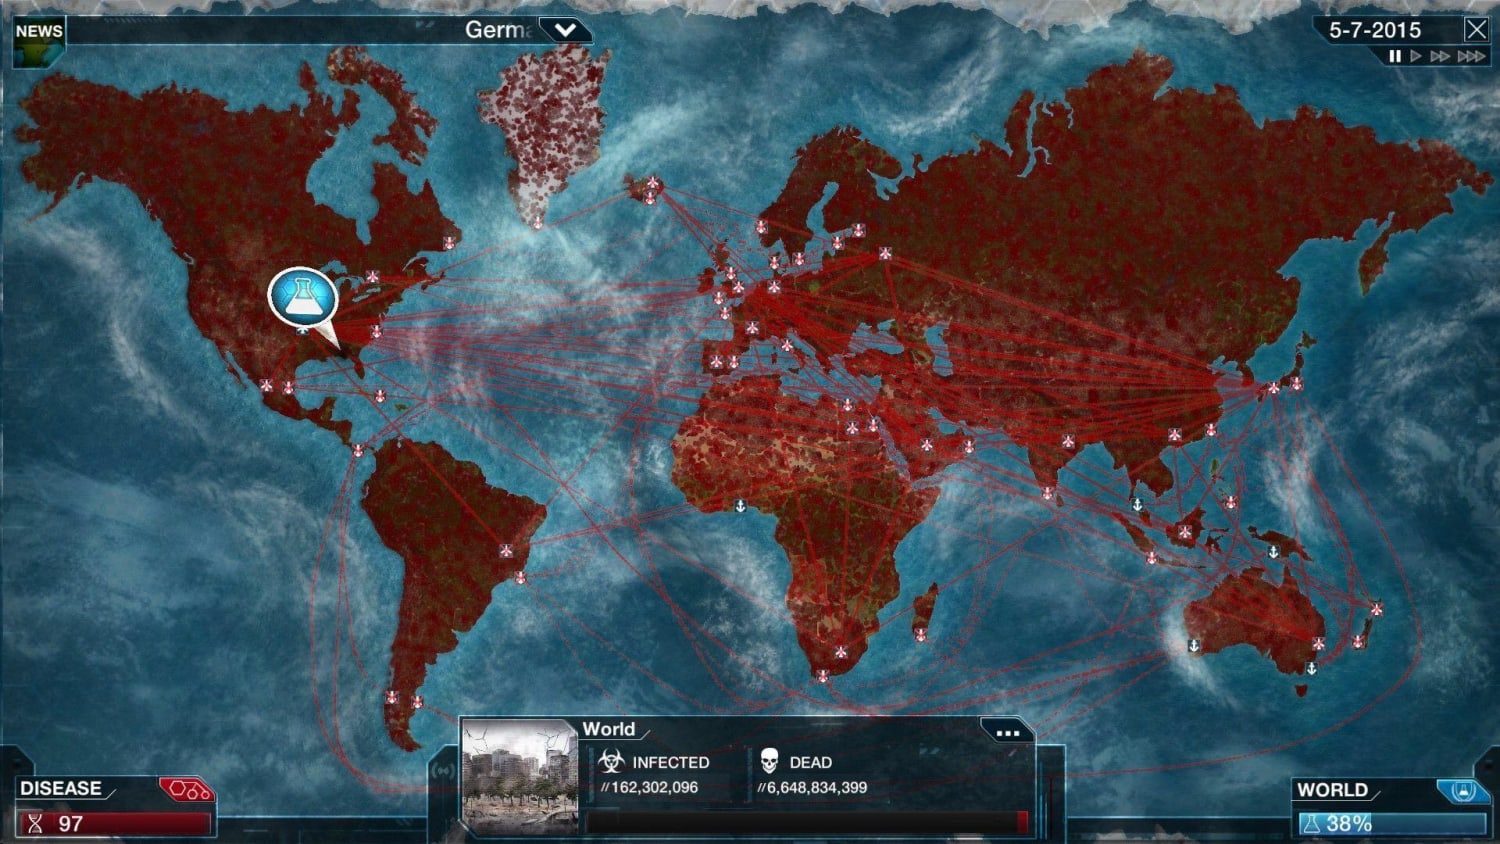 Plague Inc. skyrockets to top of Apple's paid iPhone apps as fears of coronavirus spread